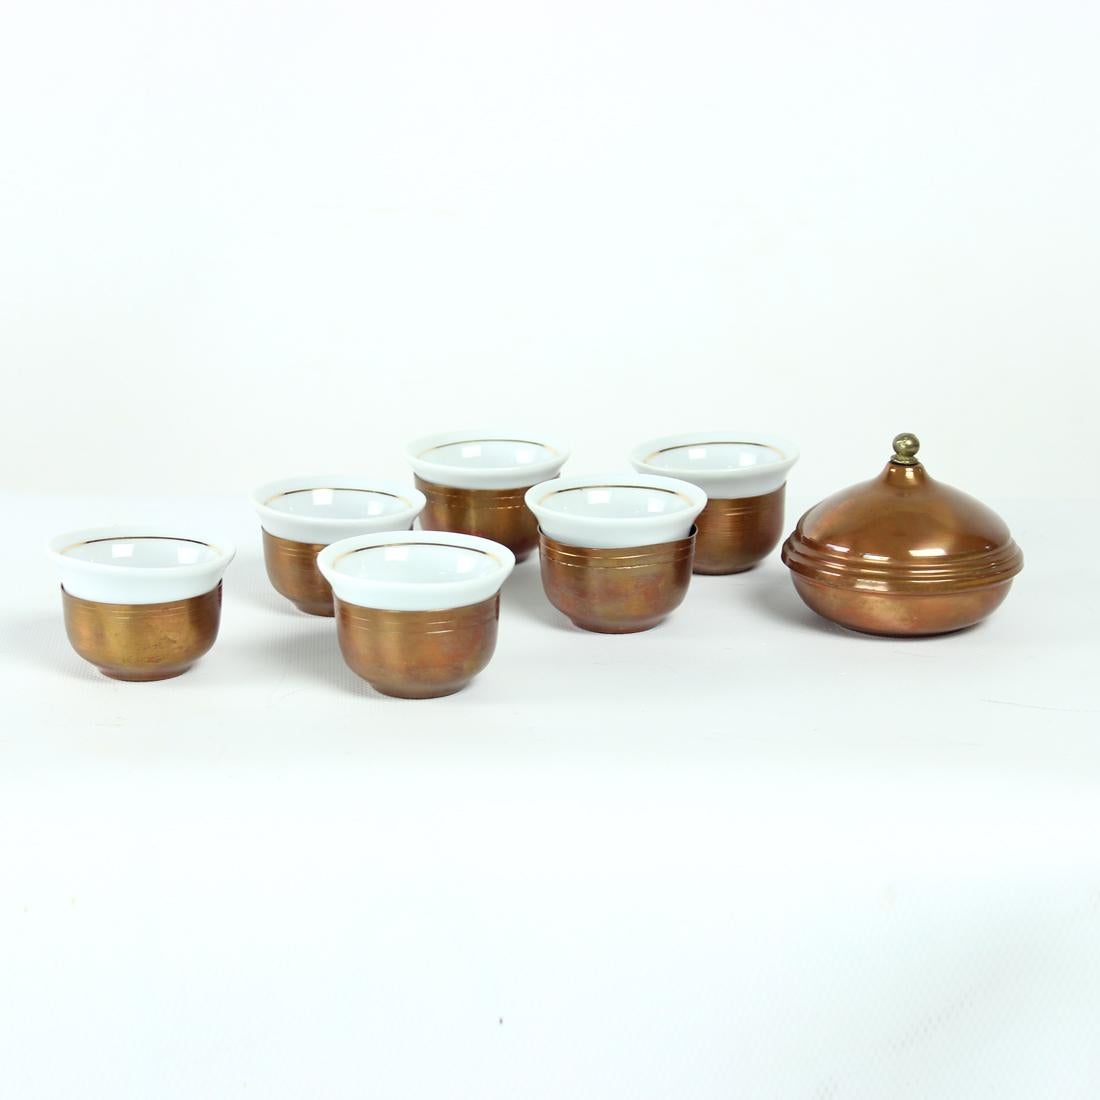 Beautiful vintage espresso cups (set of 6) with a sugar jar. The cups are made of white porcelaine with gold rim. Each cup sits in a copper cup. this not only looks very pretty, but allows you to hold the cup comfortably with hot drink inside. The